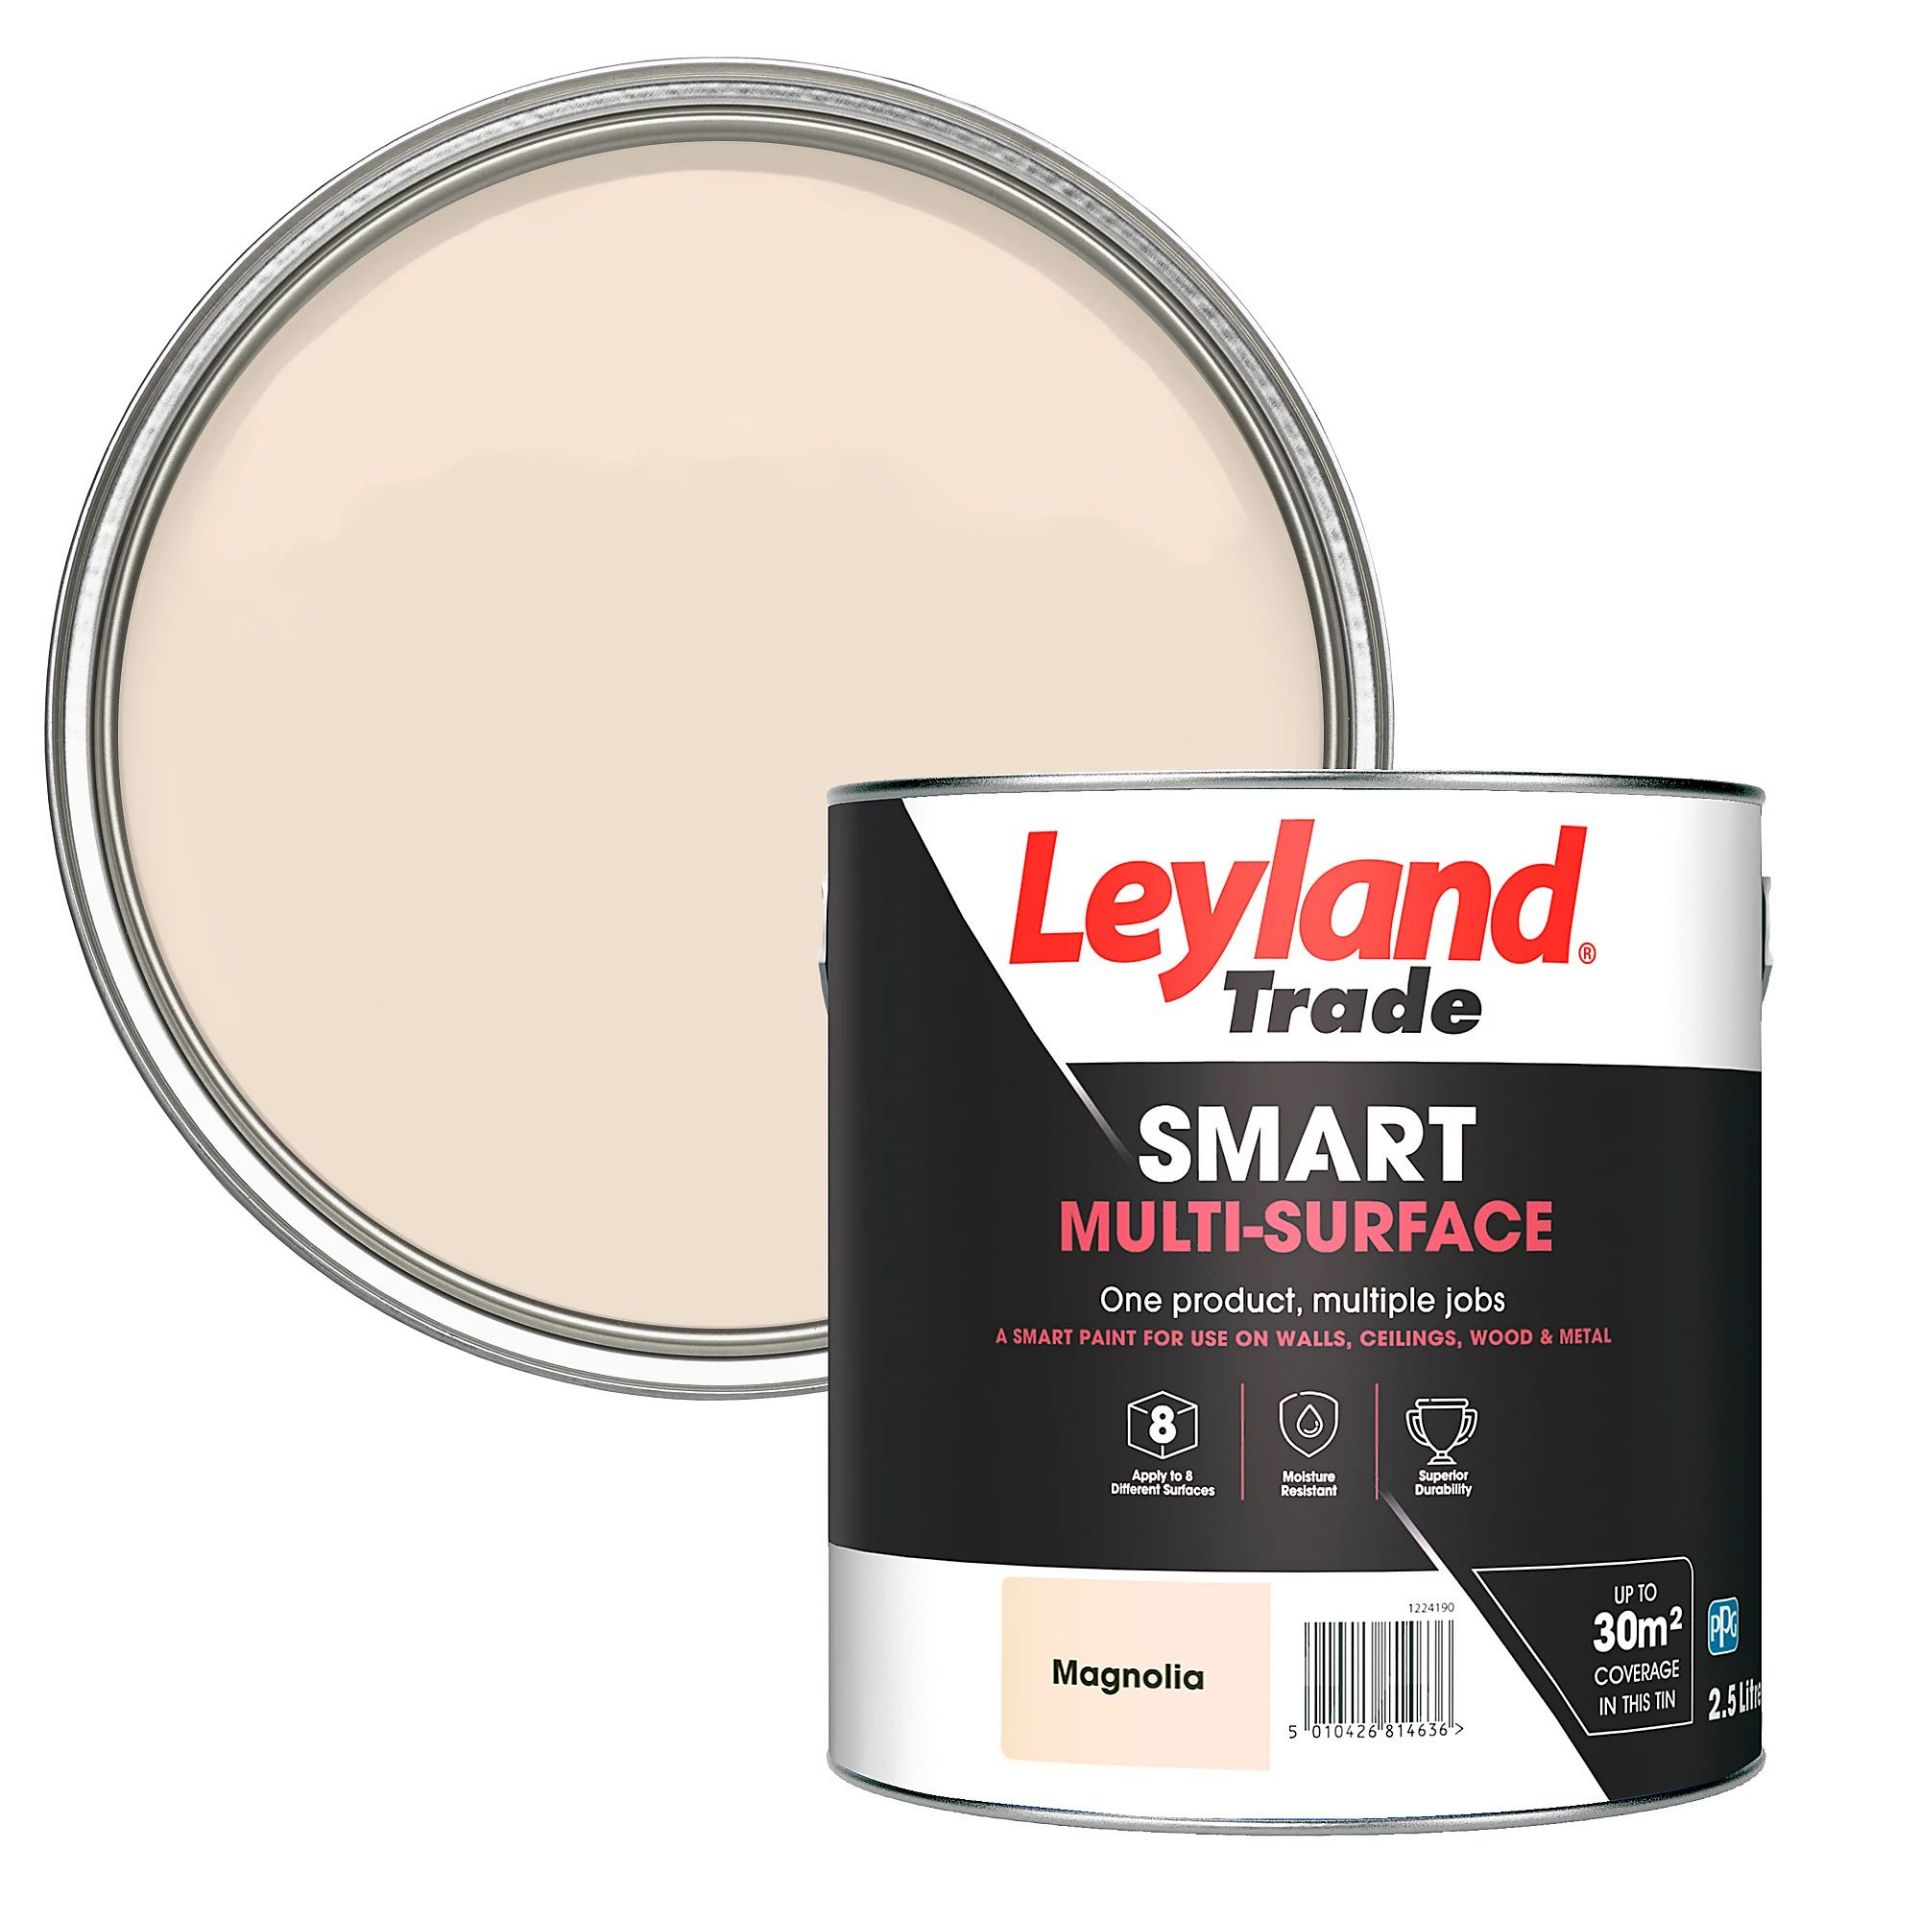 7 X BRAND NEW LEYLAND TRADE SMART MULTISURFACE MAGNOLIA PAINT 2.5L S1-13